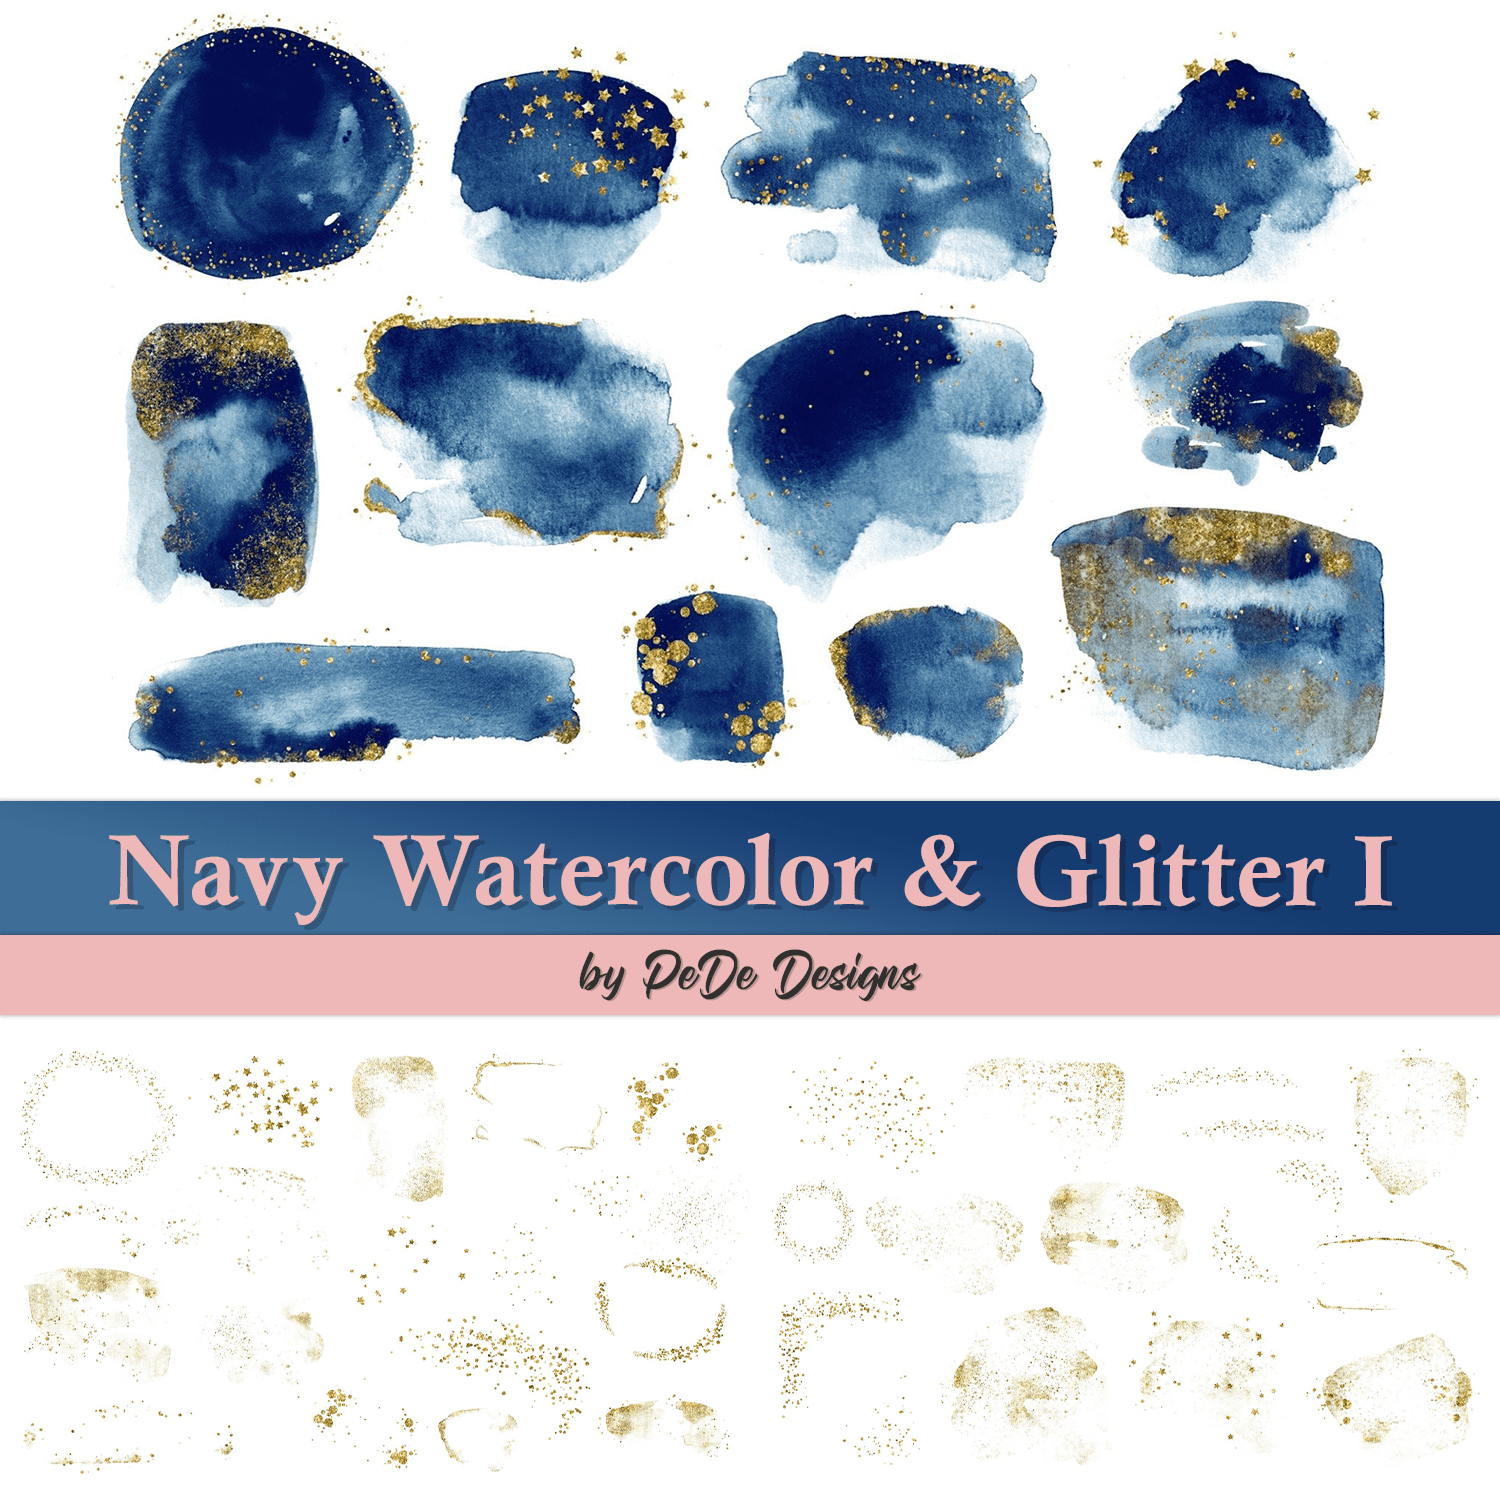 Navy Watercolor & Glitter I cover.